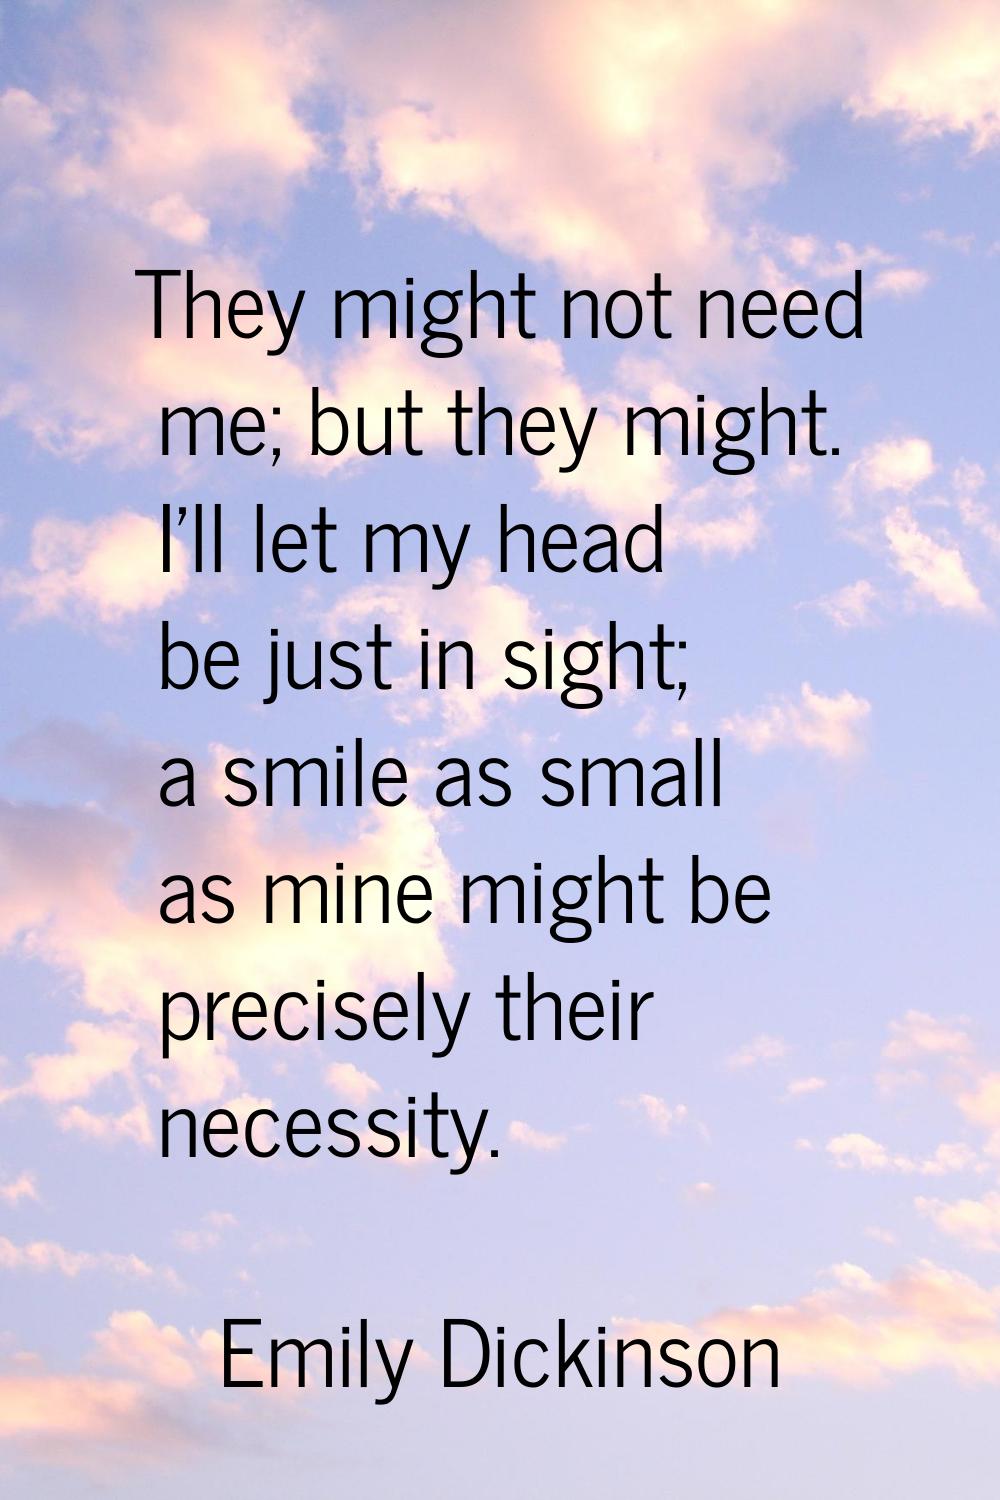 They might not need me; but they might. I'll let my head be just in sight; a smile as small as mine